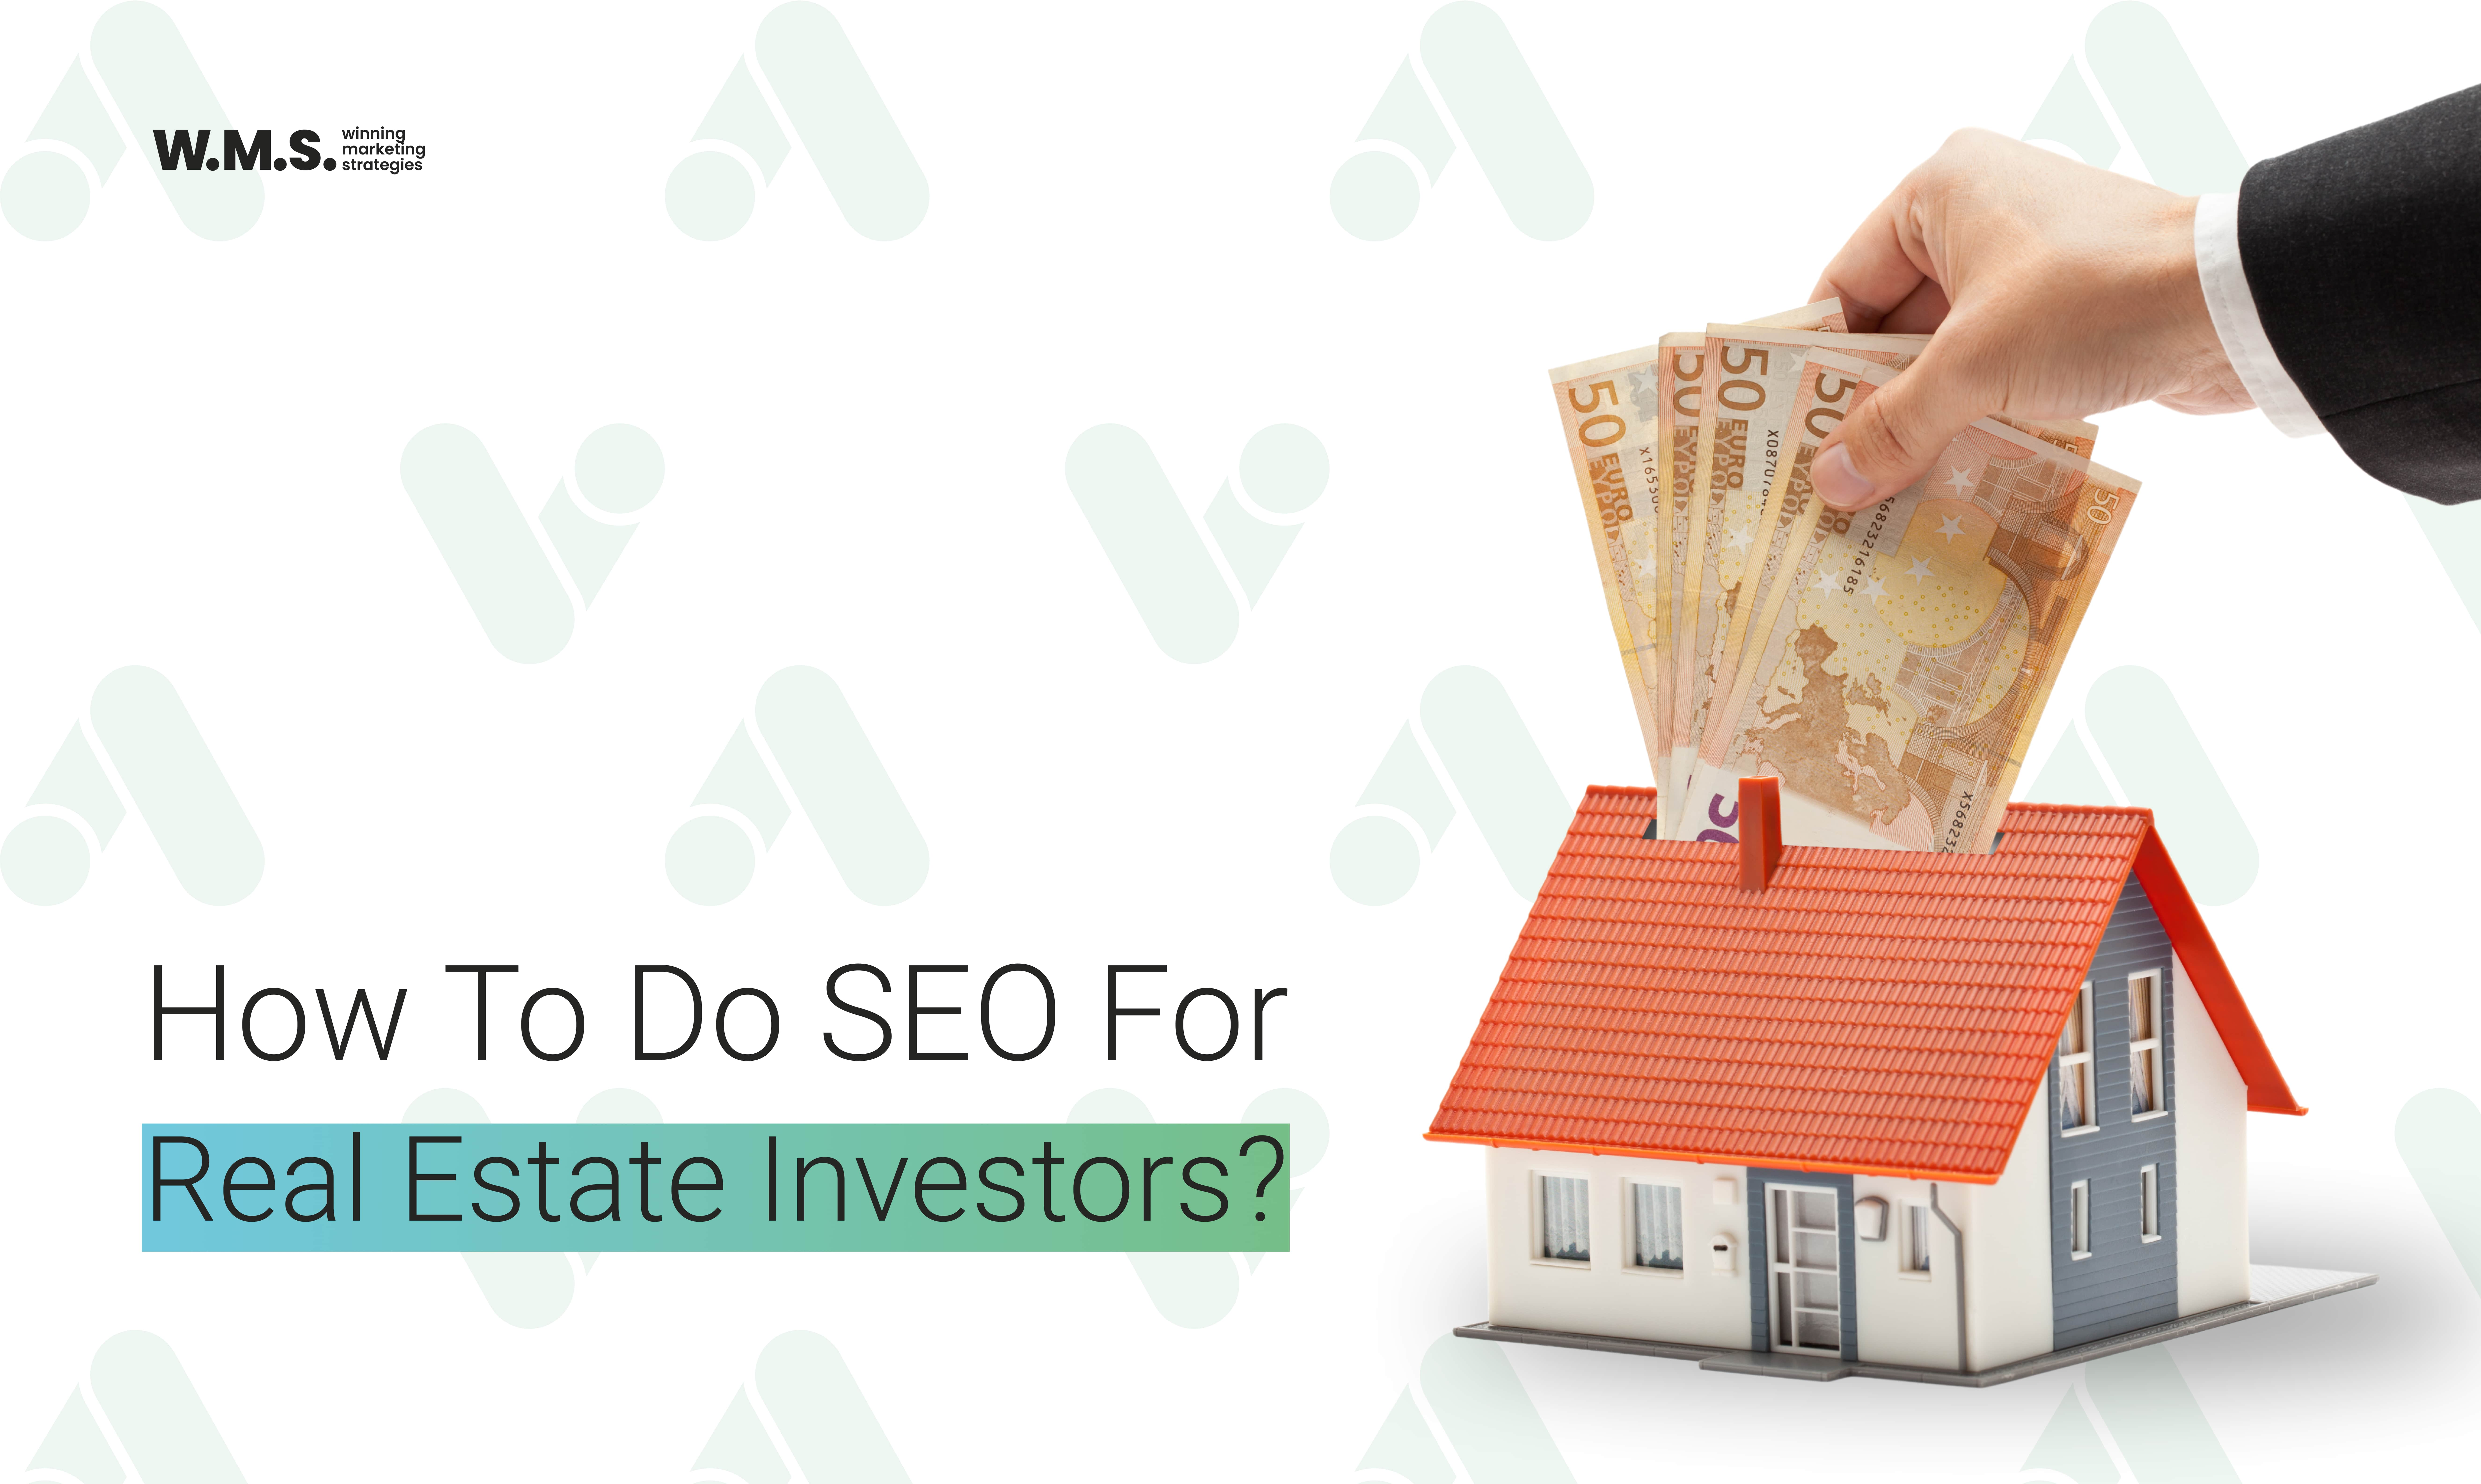 How To Do SEO For Real Estate Investors